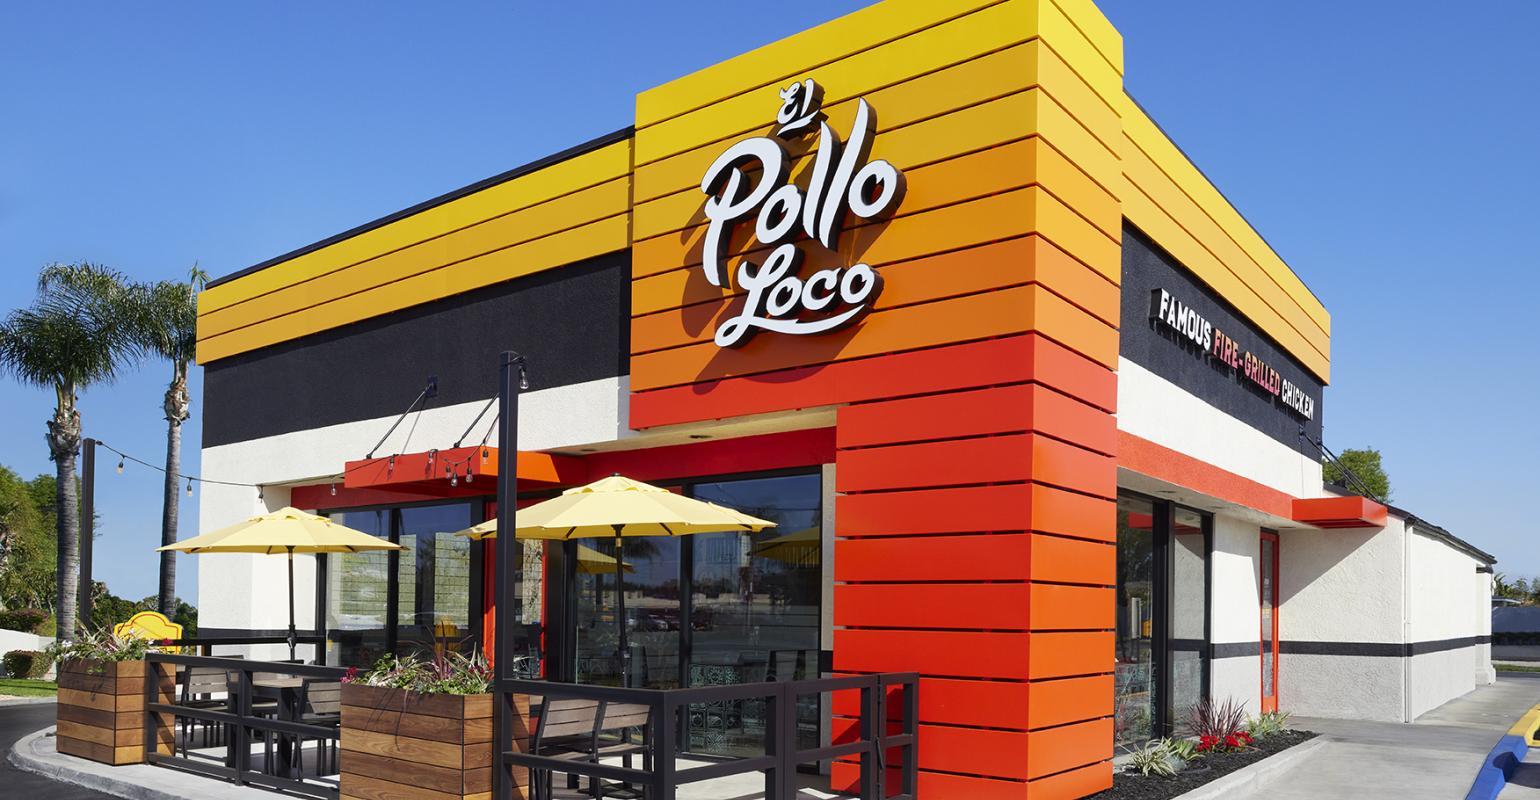 El Pollo Loco launches Loco Gifts and Gear store Nation's Restaurant News